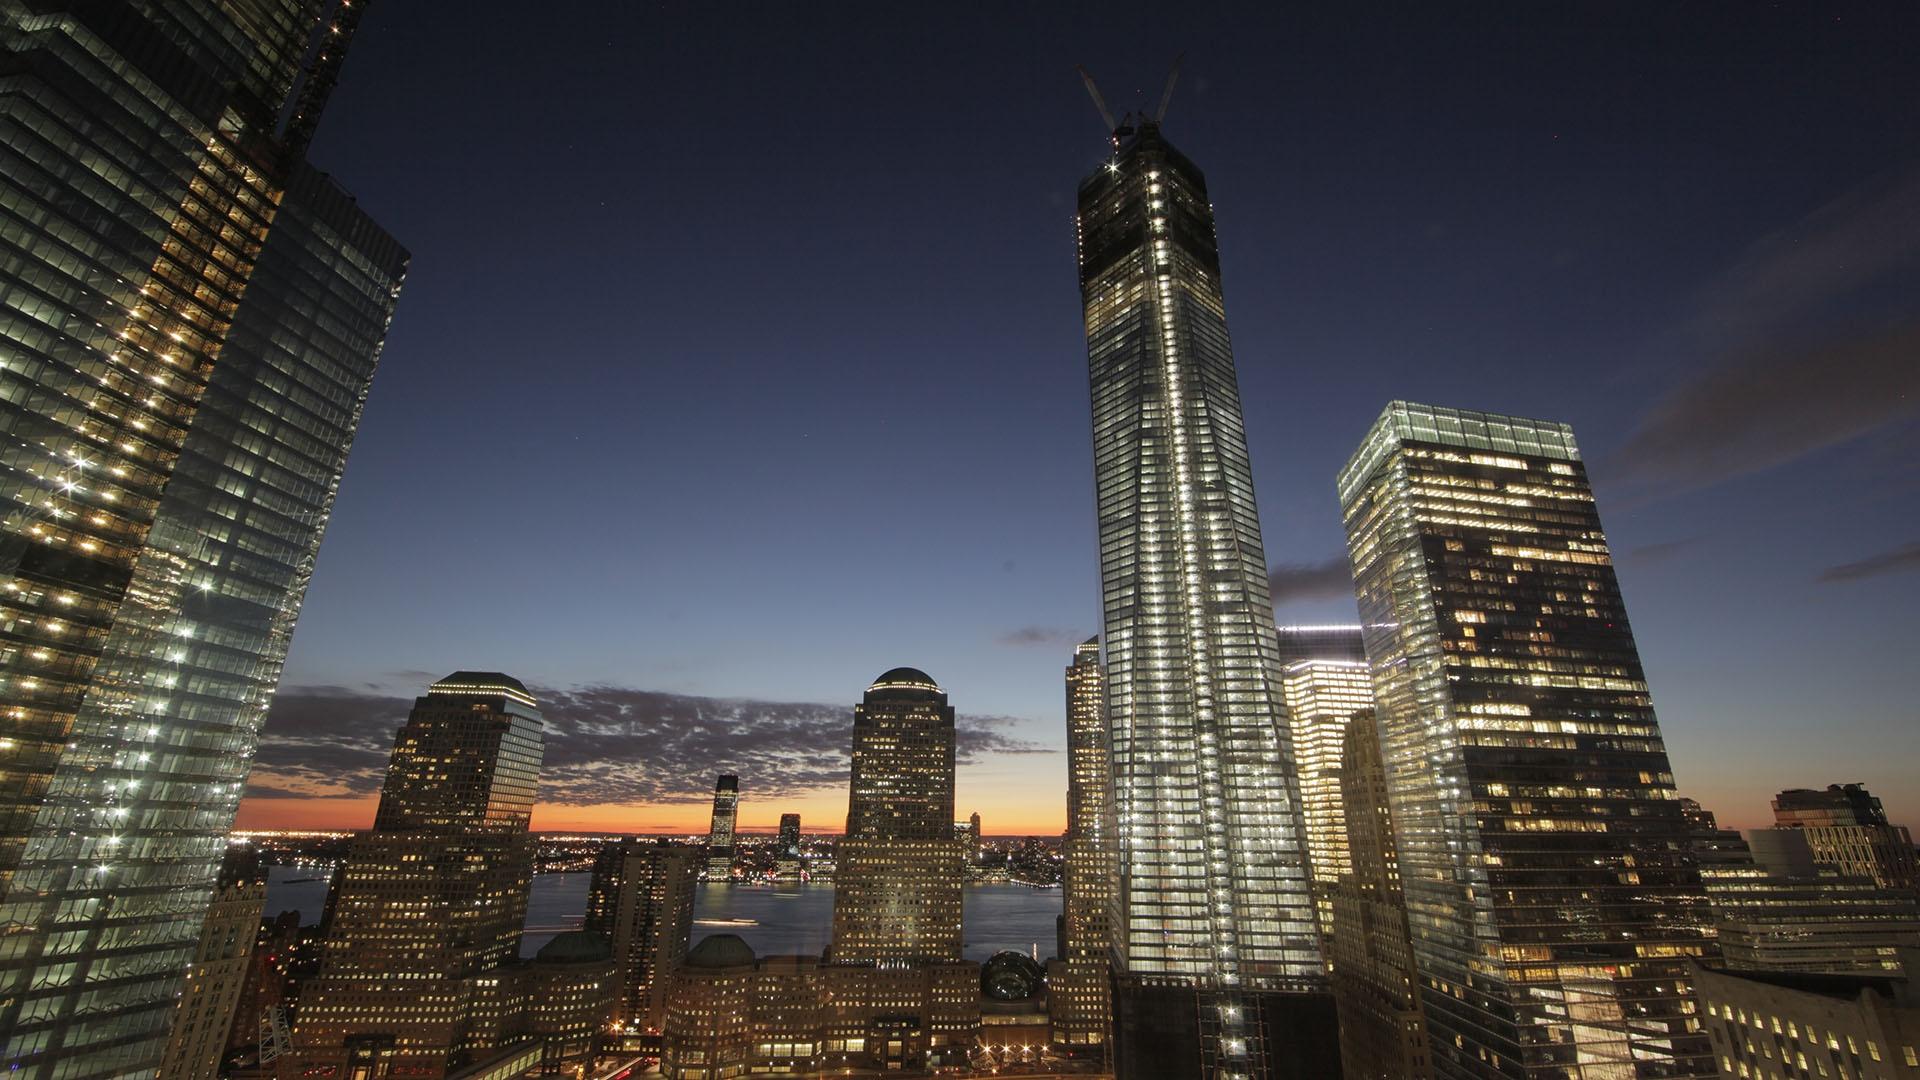 Image of One World Trade Center at night